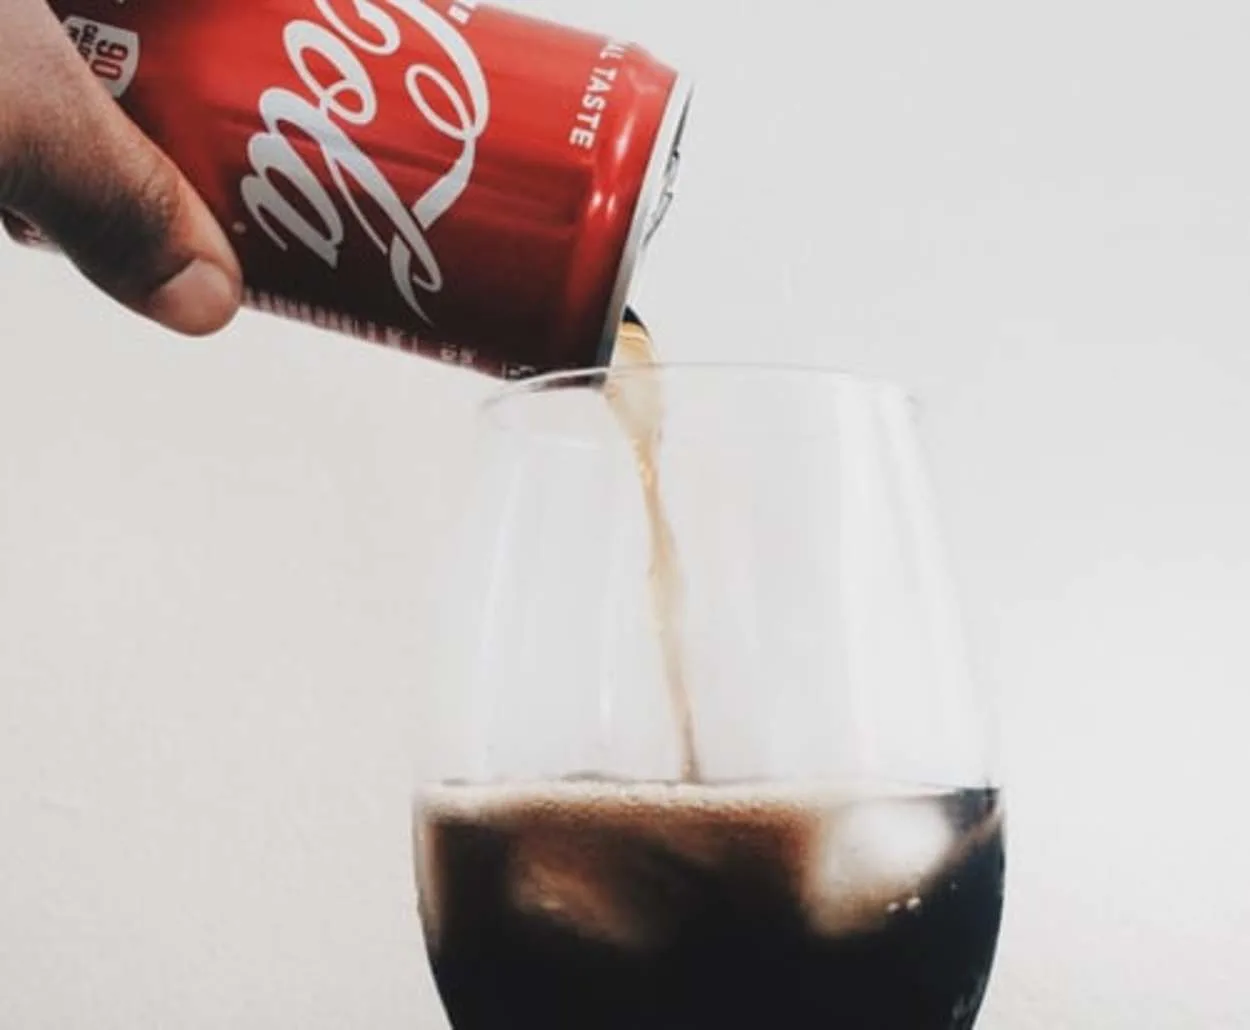 A can of Coke being poured into a glass